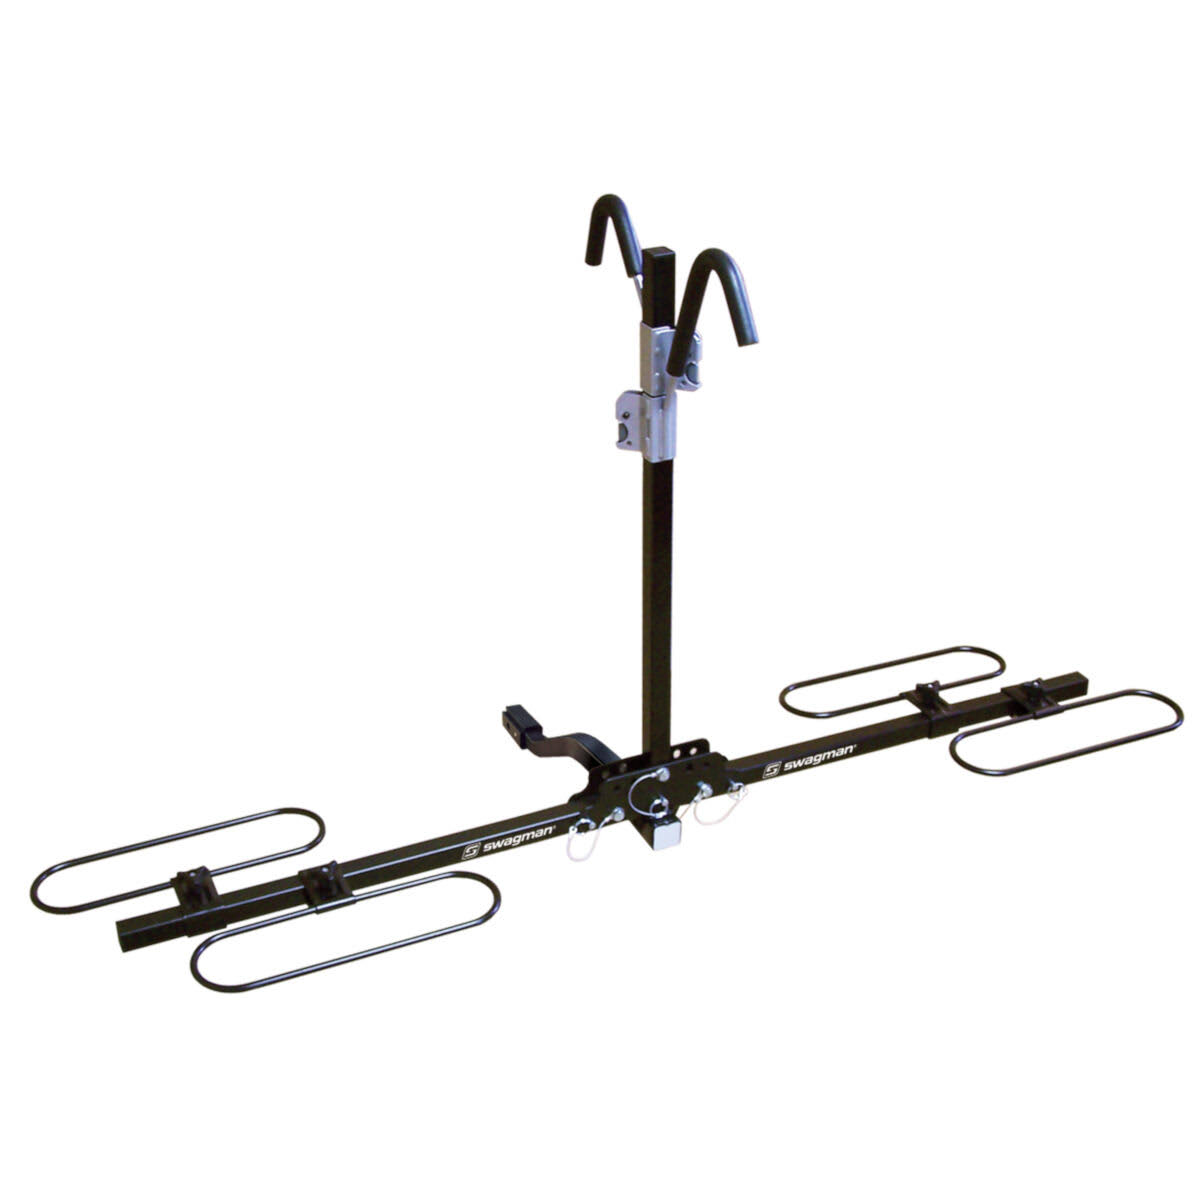 Swagman XC Cross-Country 2-Bike Hitch Mount Rack - 1 1/4" And 2" Receiver